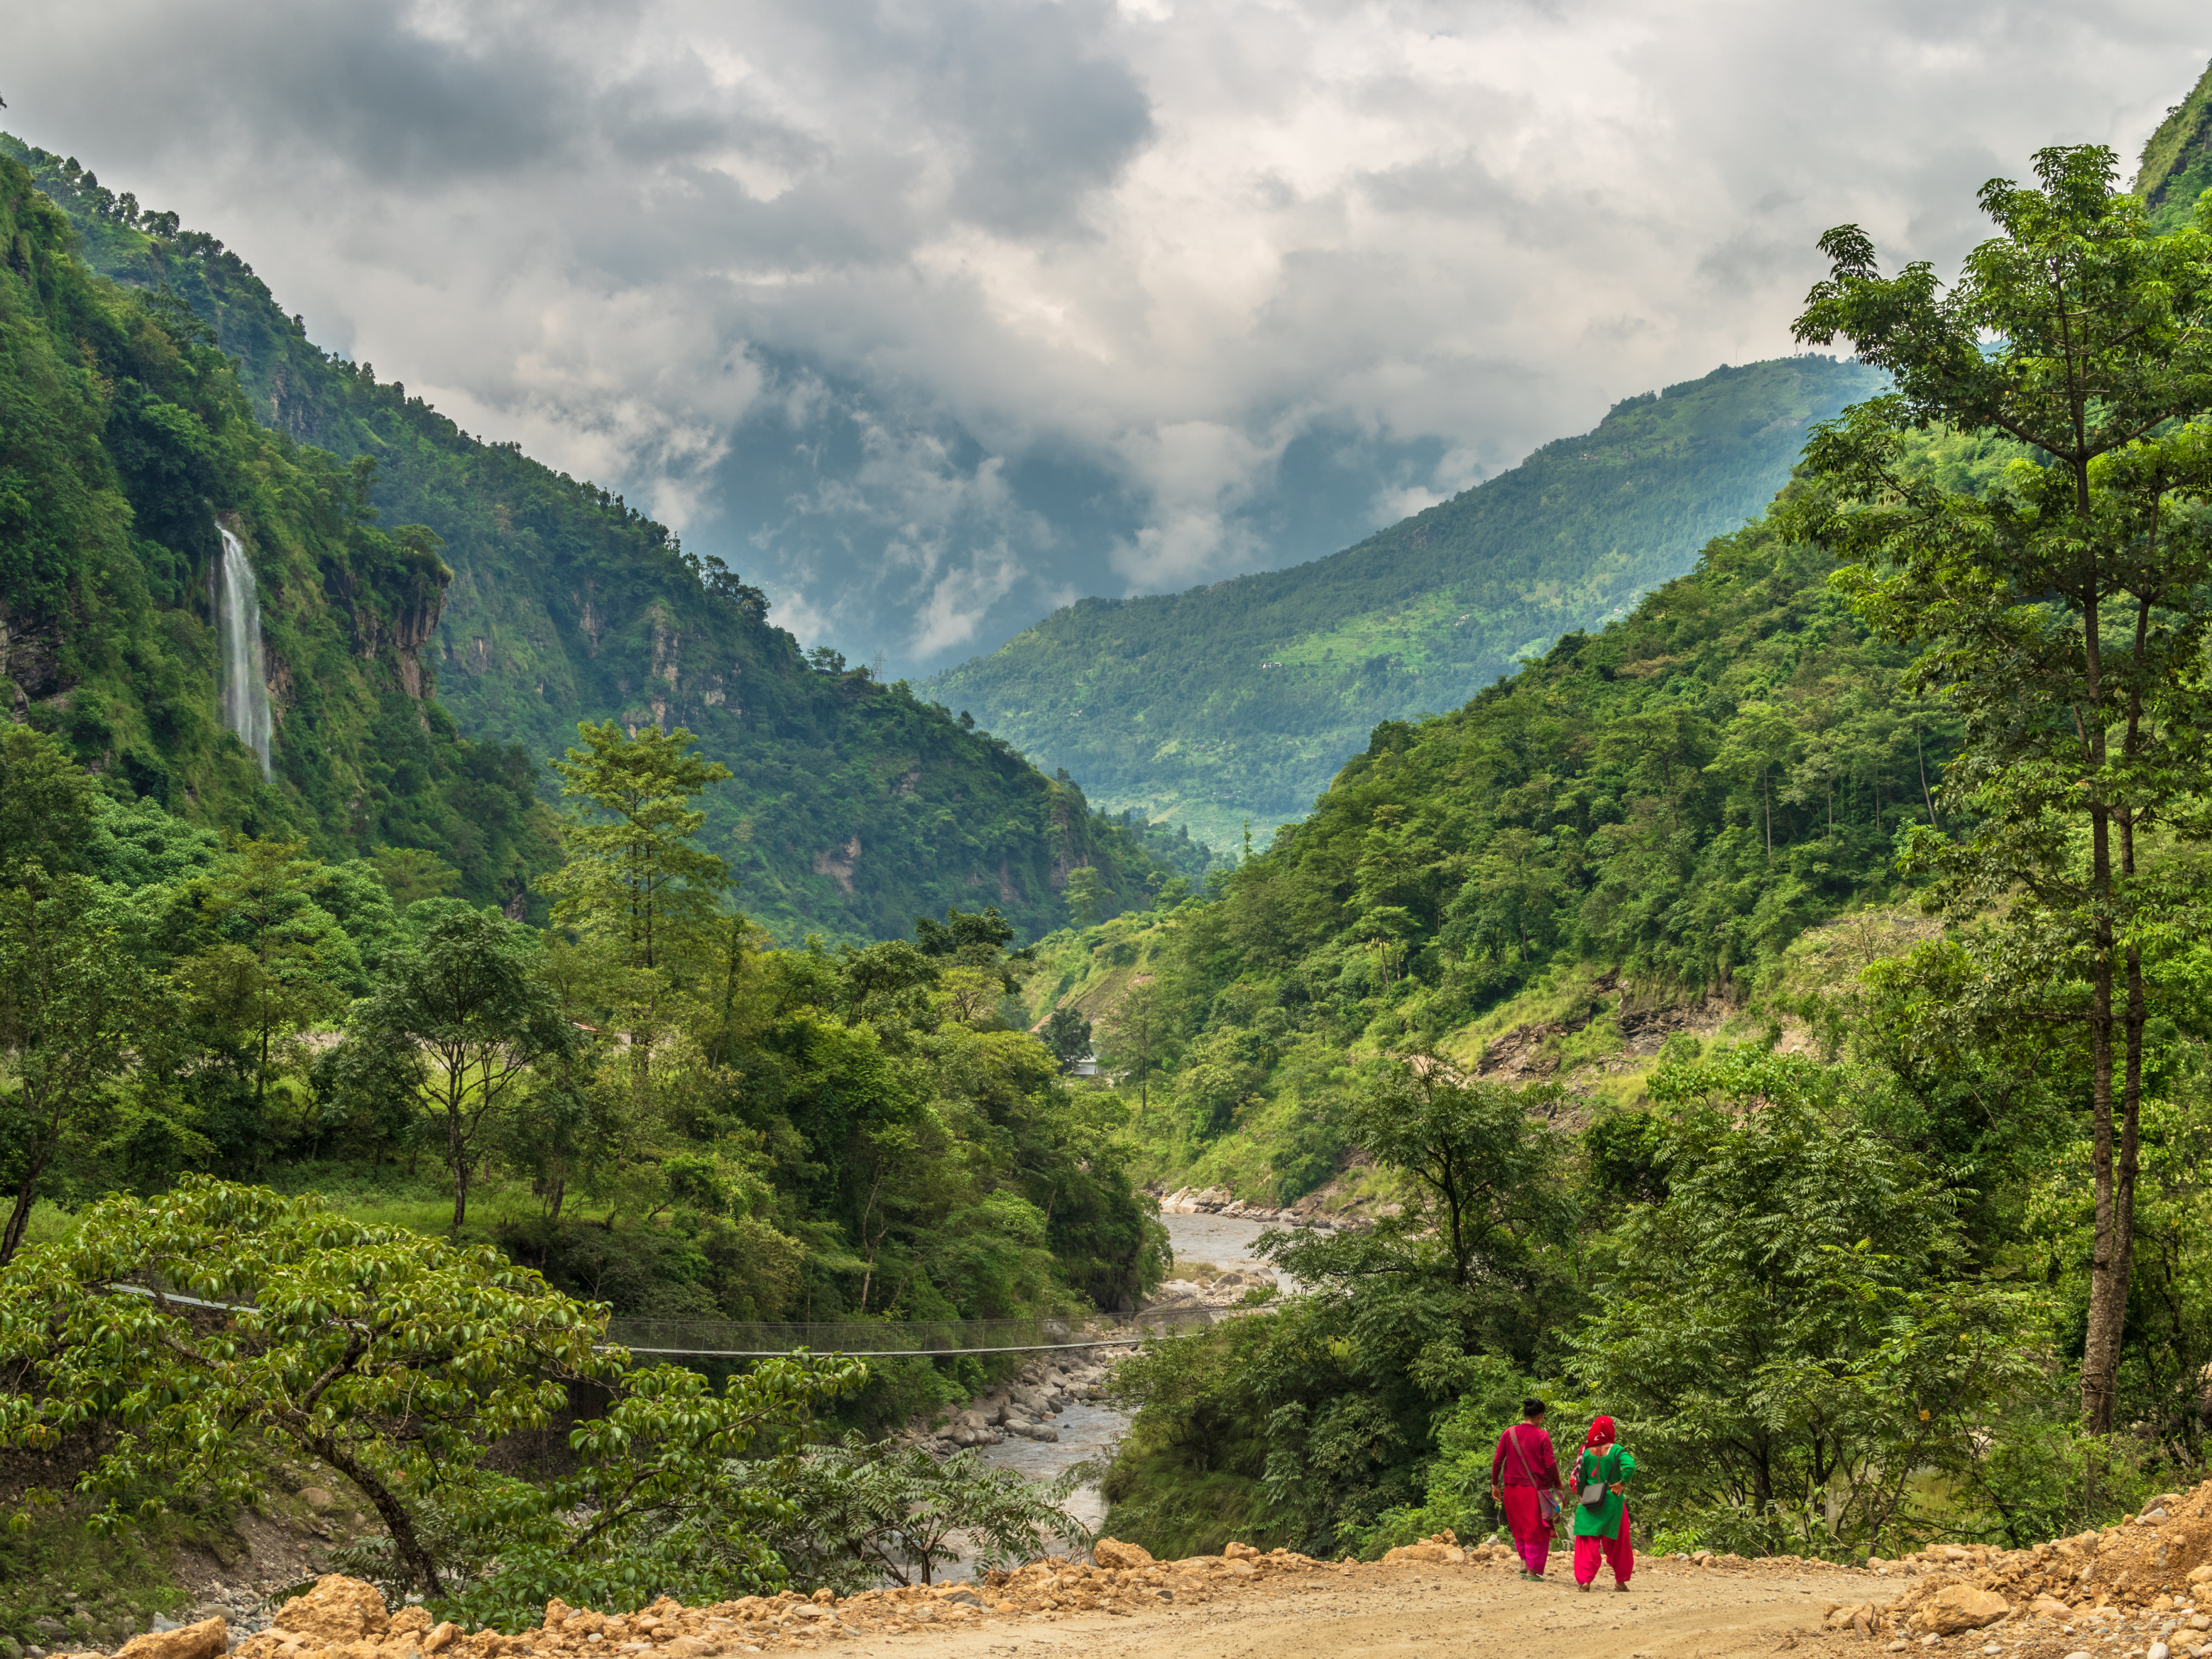 With tropical and temperate forests covering about 40 per cent of the Himalayan nation, the health of its trees is key to Nepal’s prosperity and its roughly 29 million people. Photo: Shutterstock